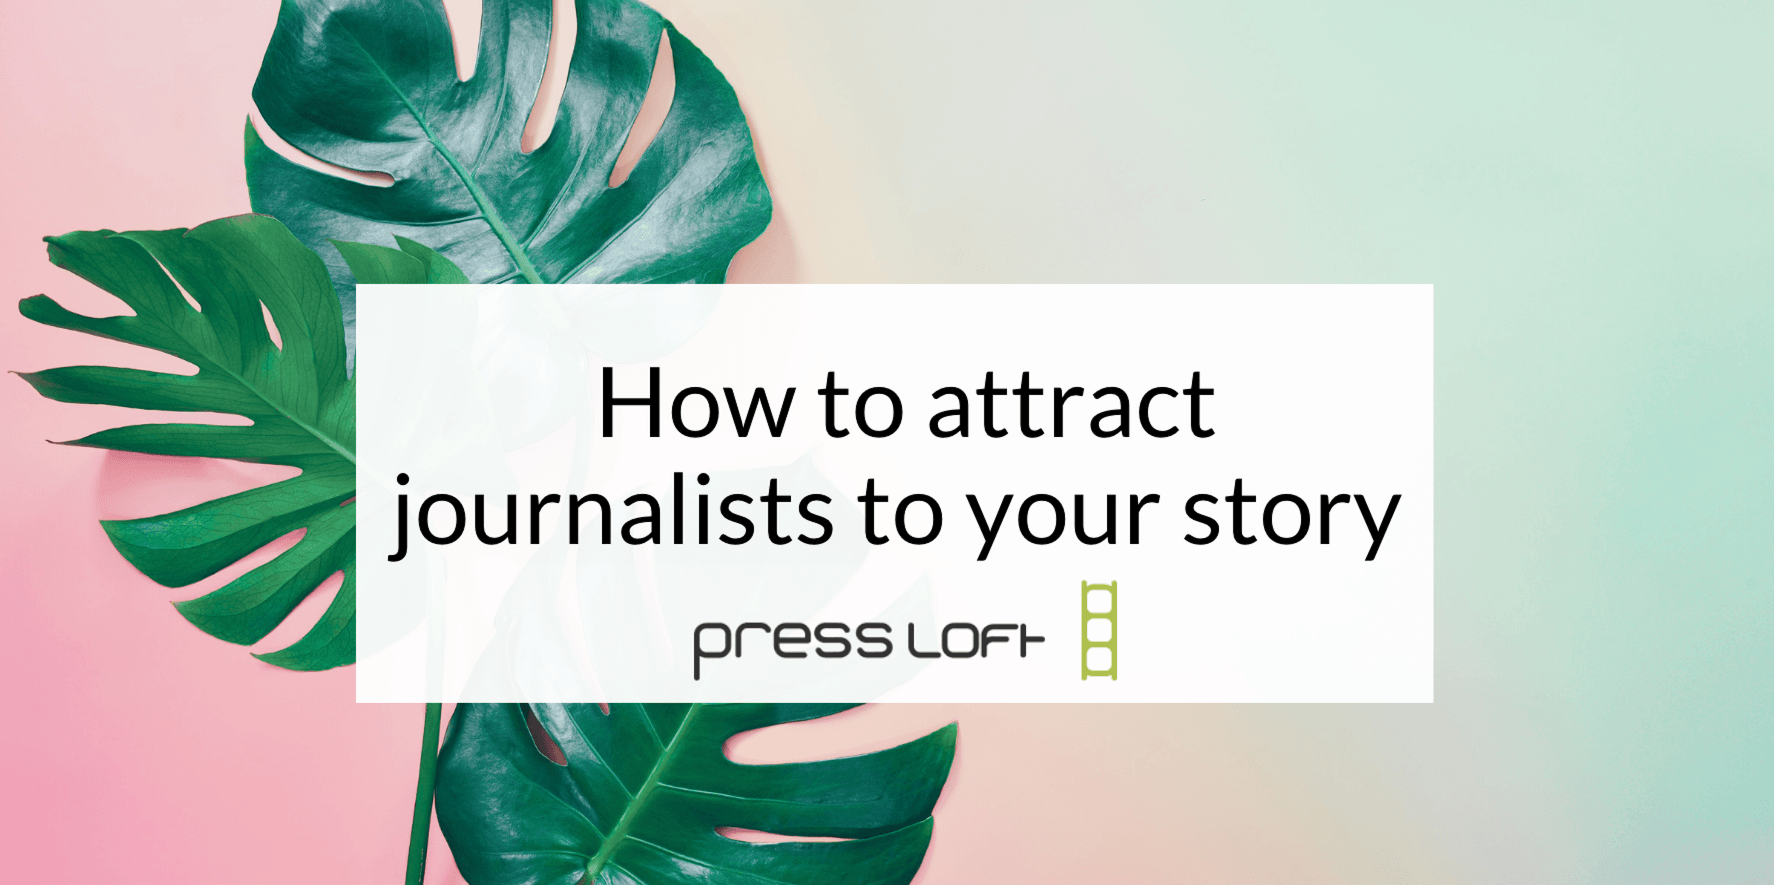 How to attract journalists to your story - top tips from Press Loft